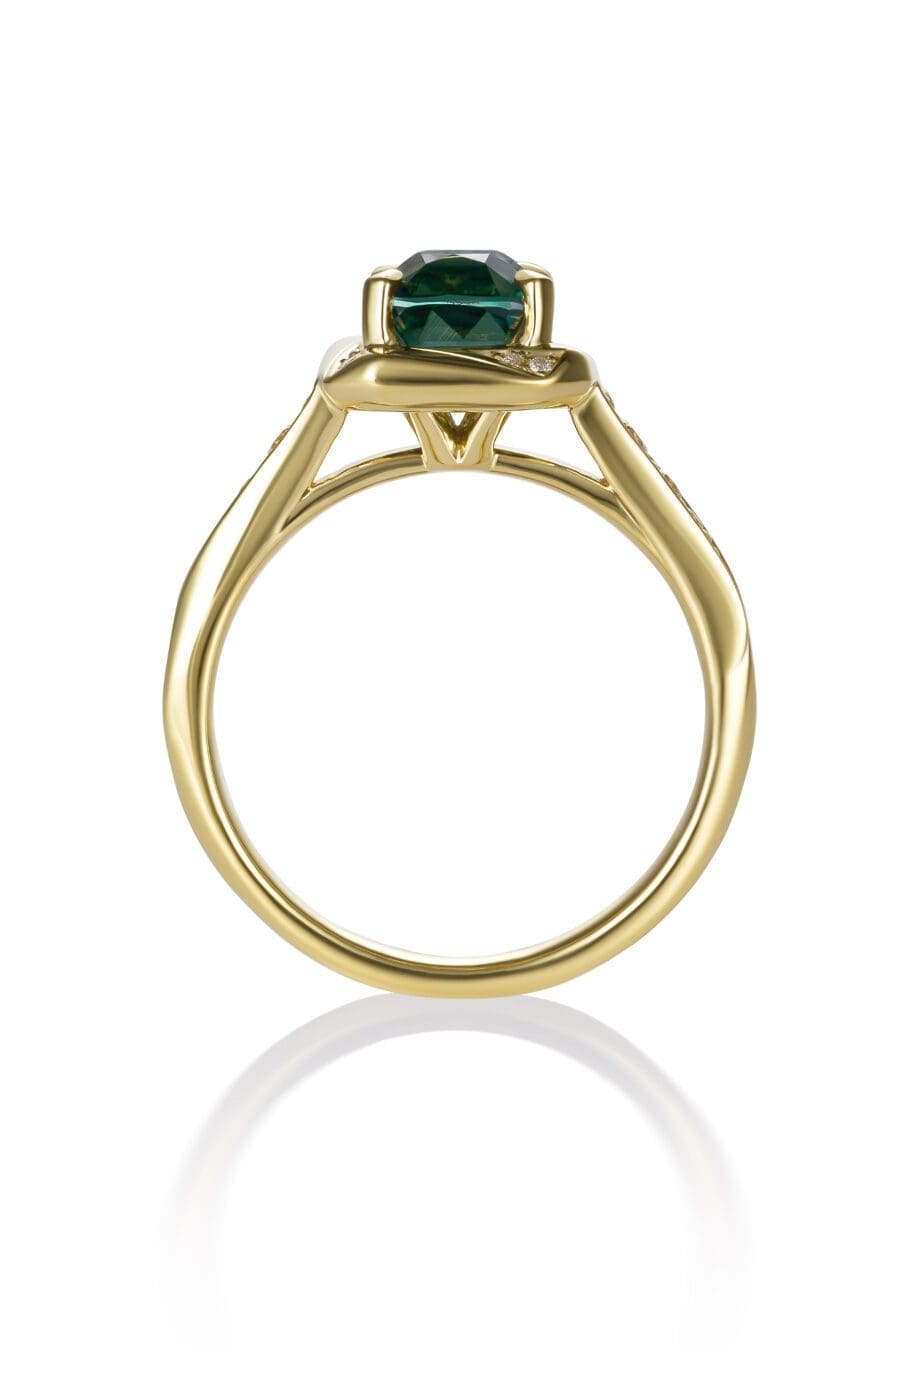 Teal sapphire and gold ring